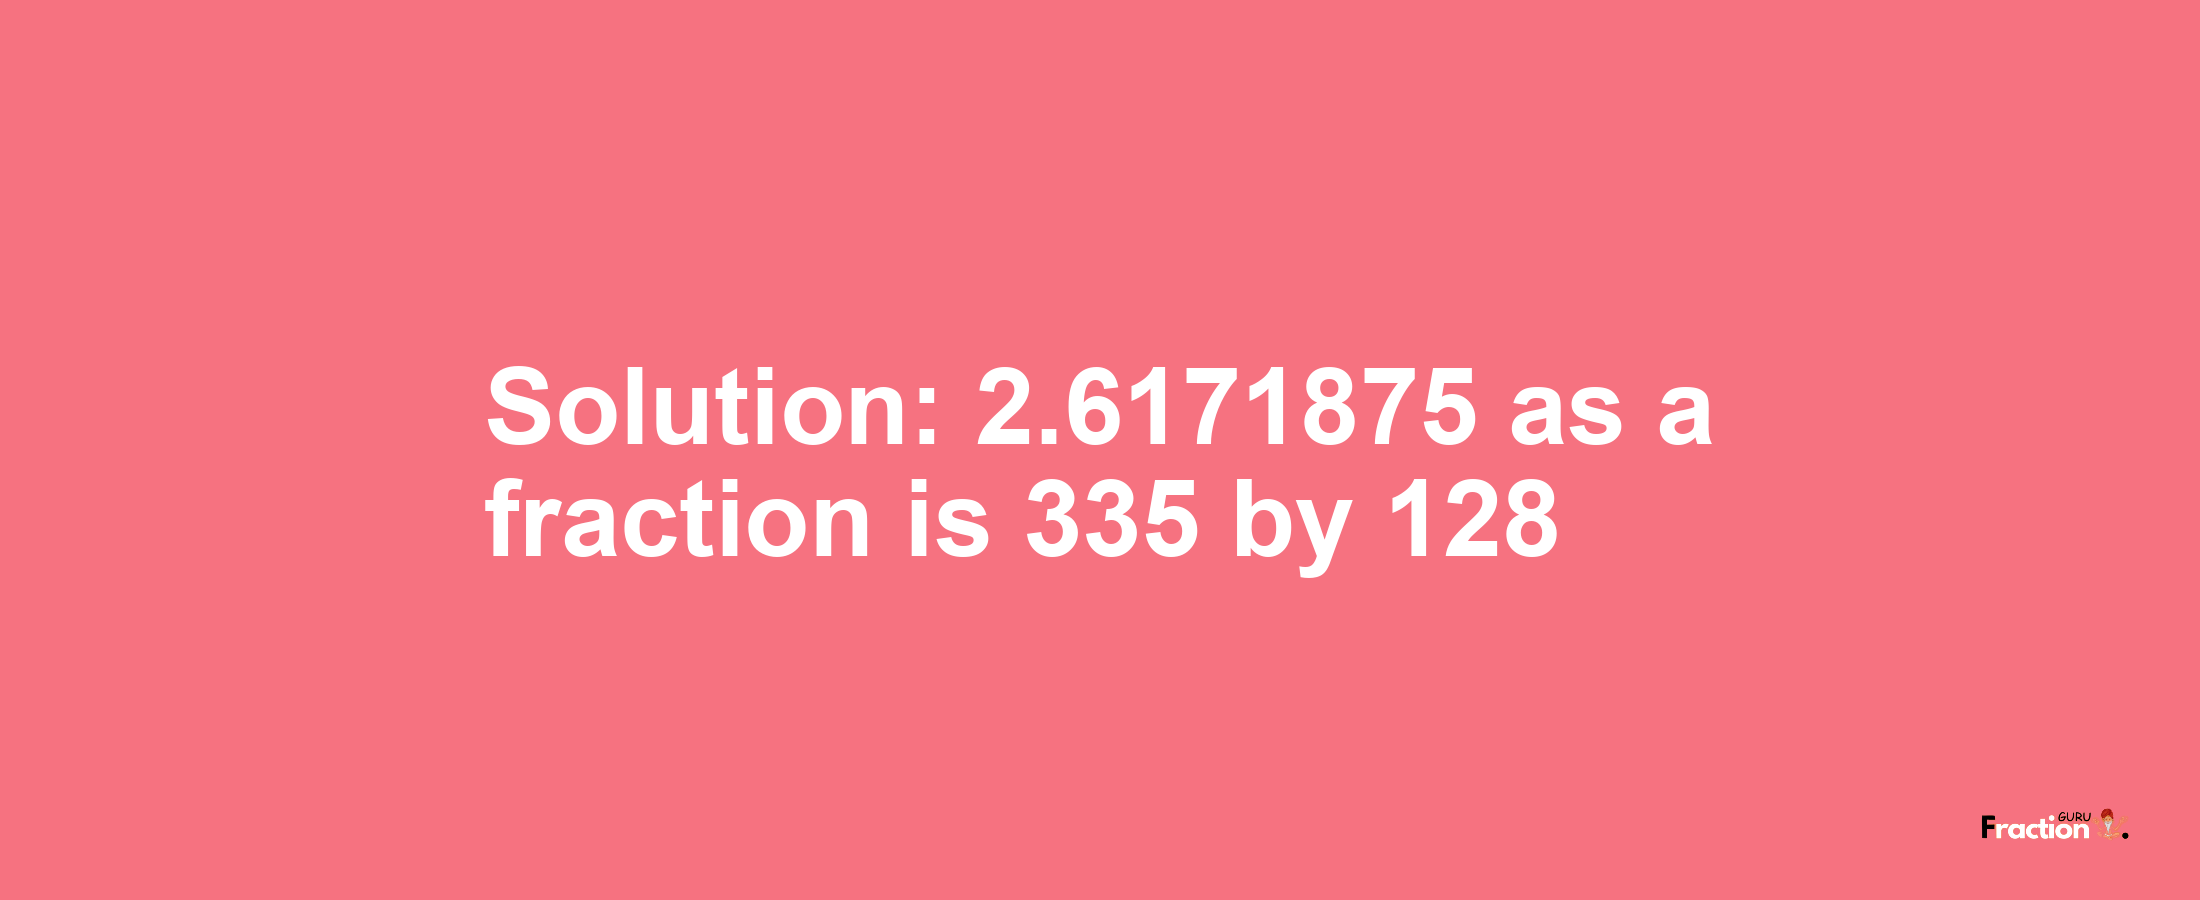 Solution:2.6171875 as a fraction is 335/128